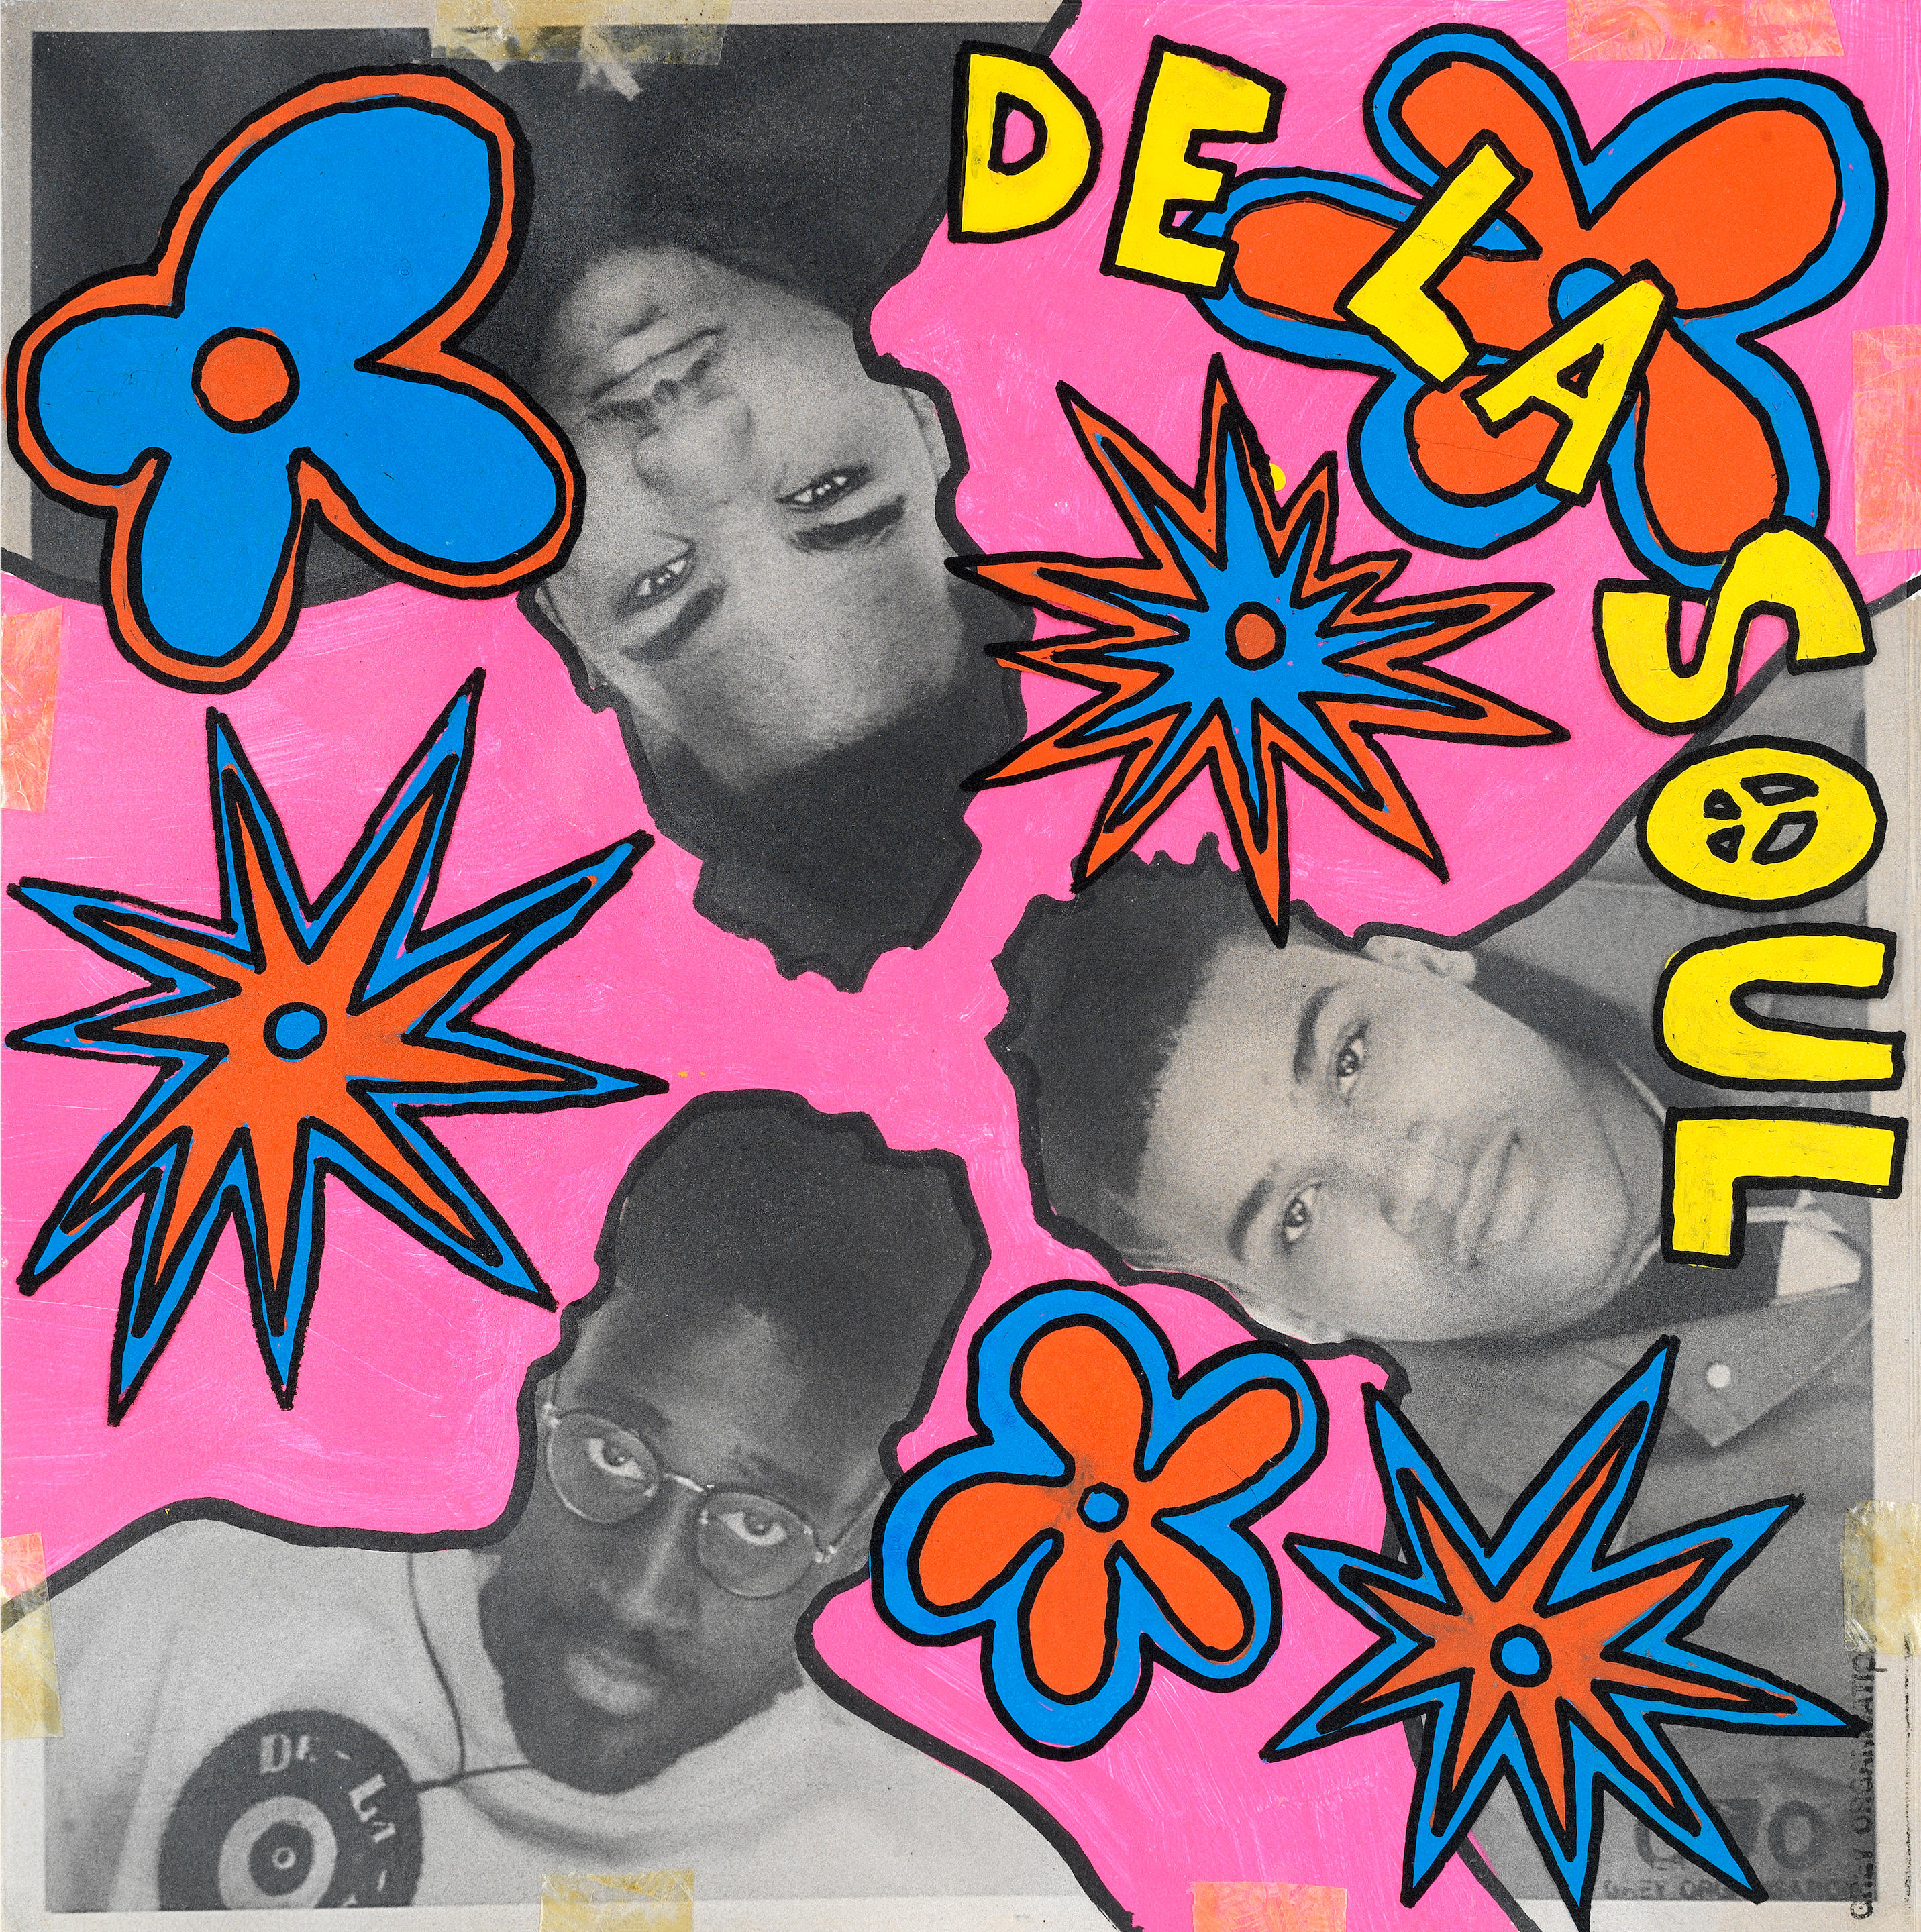 Inspired By De La Soul's 3 Feet High and Rising Album Cover